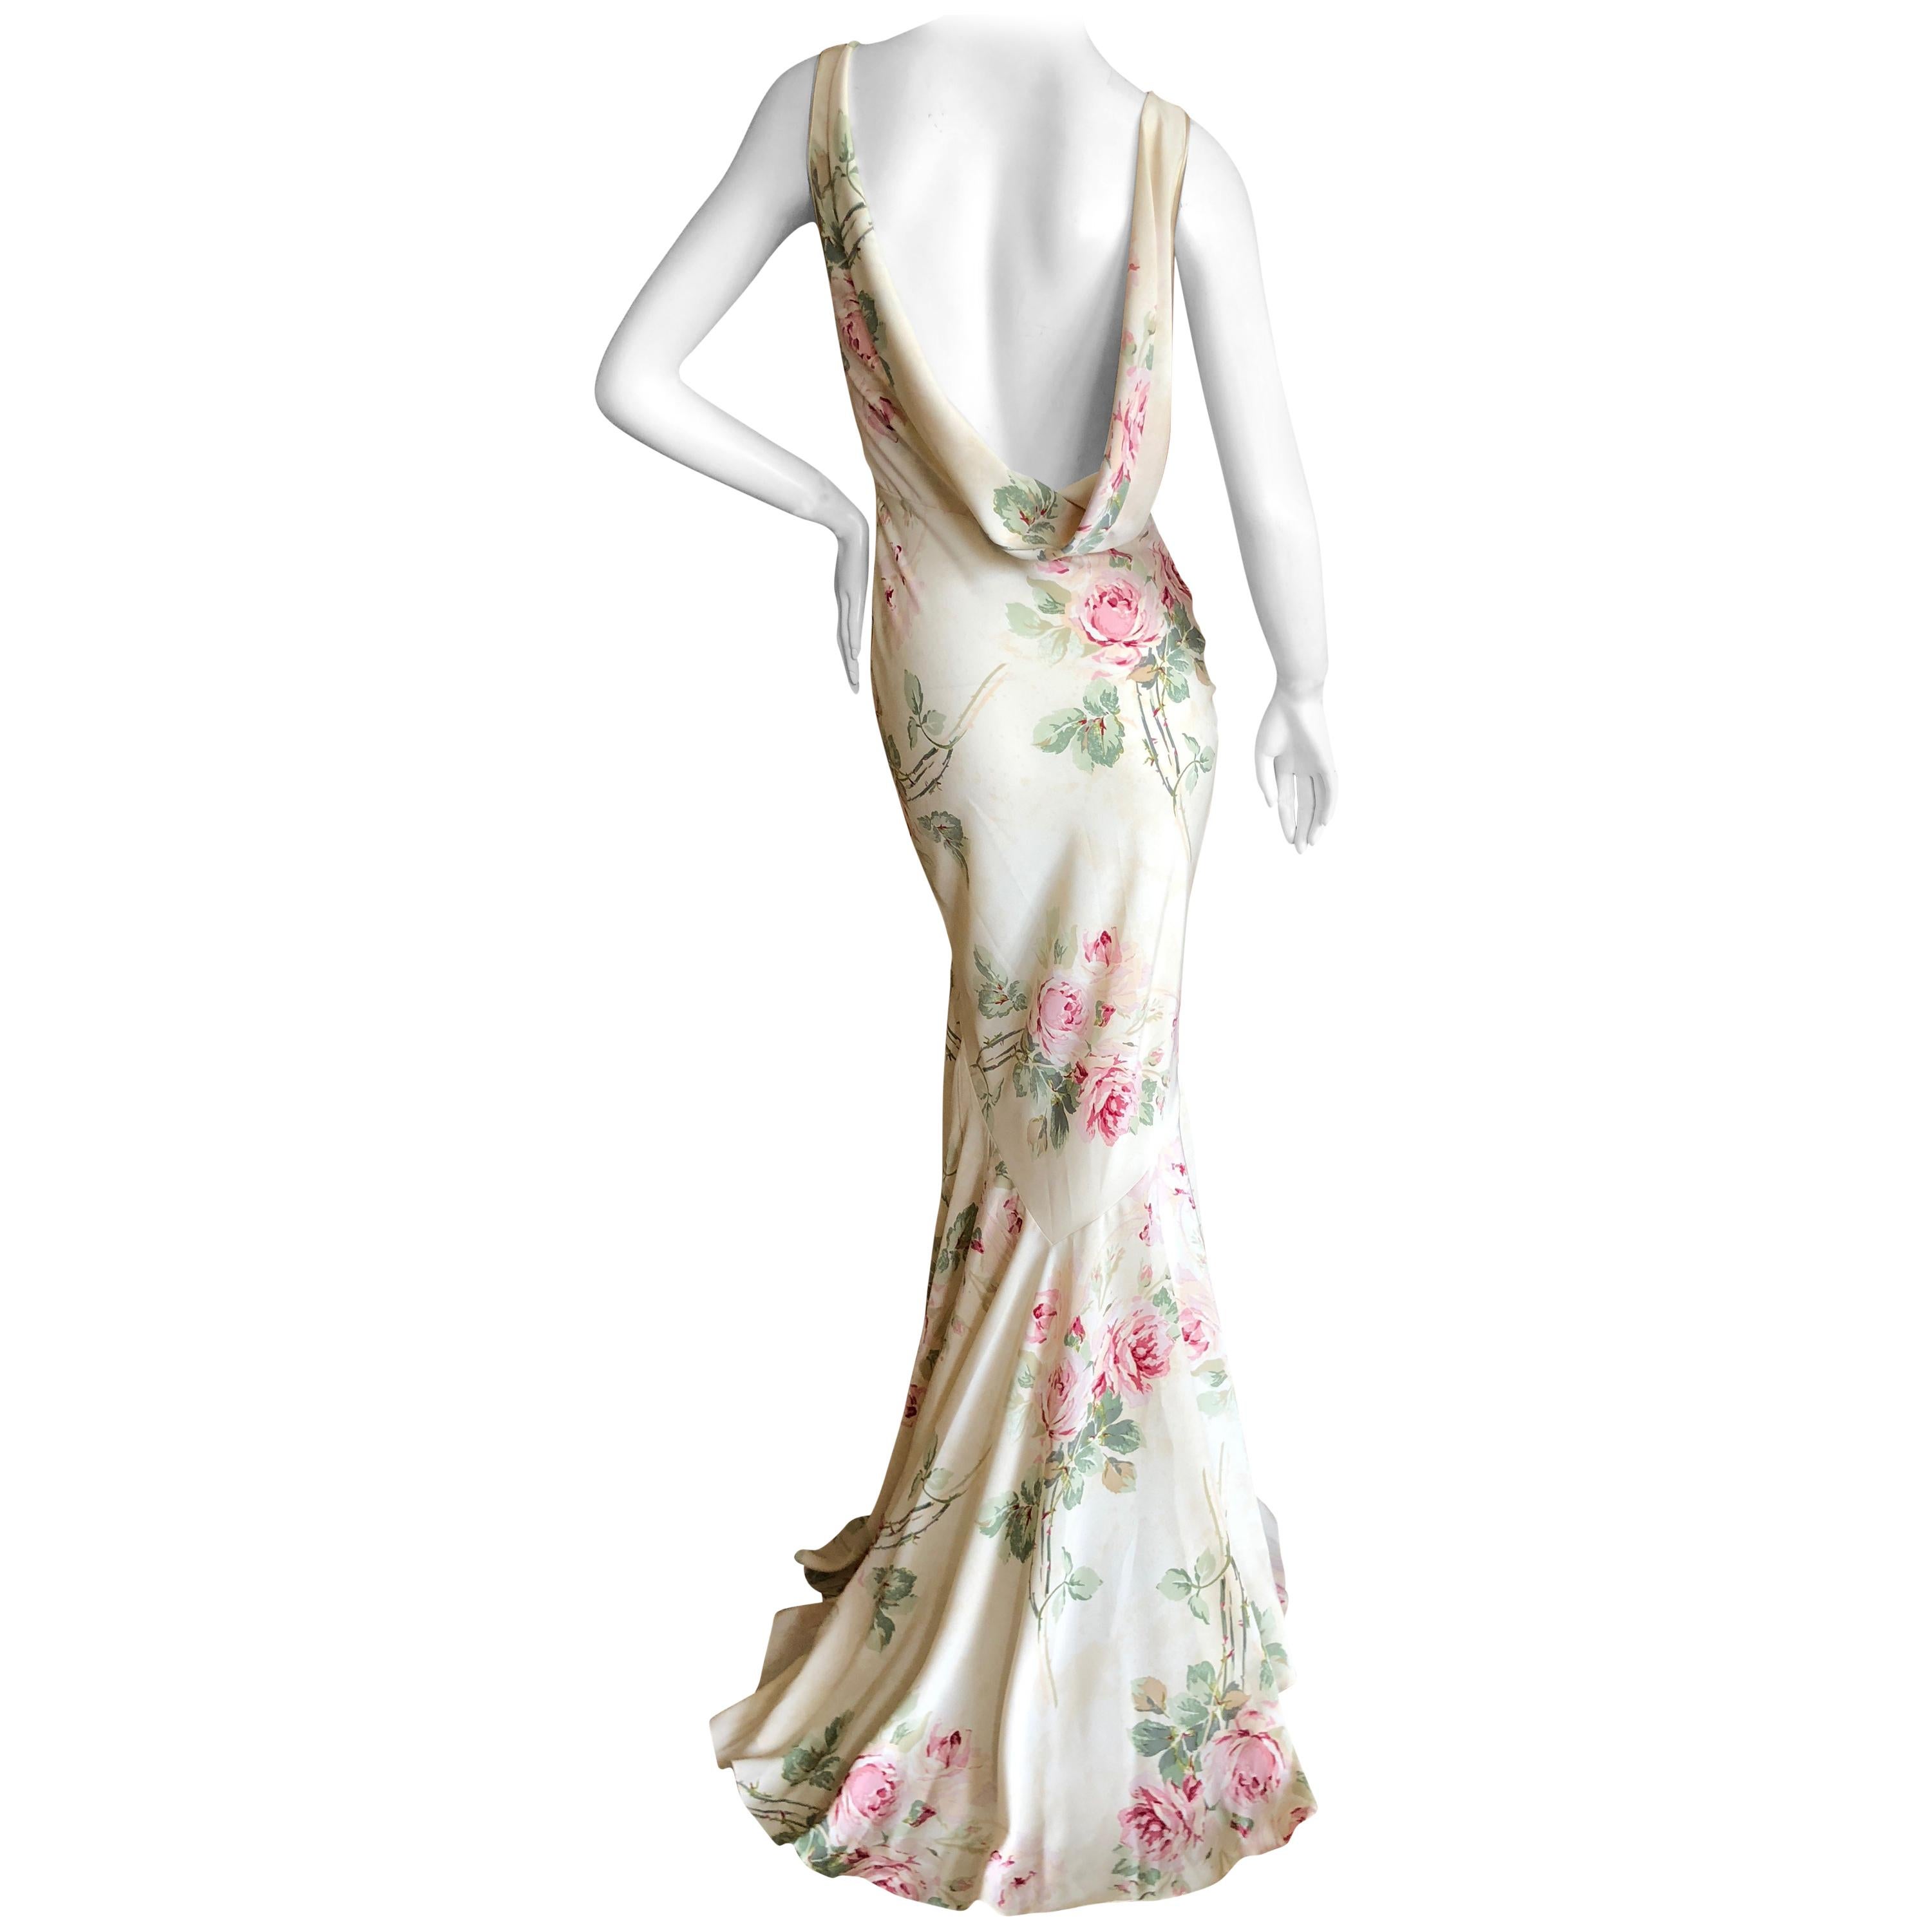 John Galliano Bias Cut Floral Dress with Draped Back and Train, 1990s  For Sale